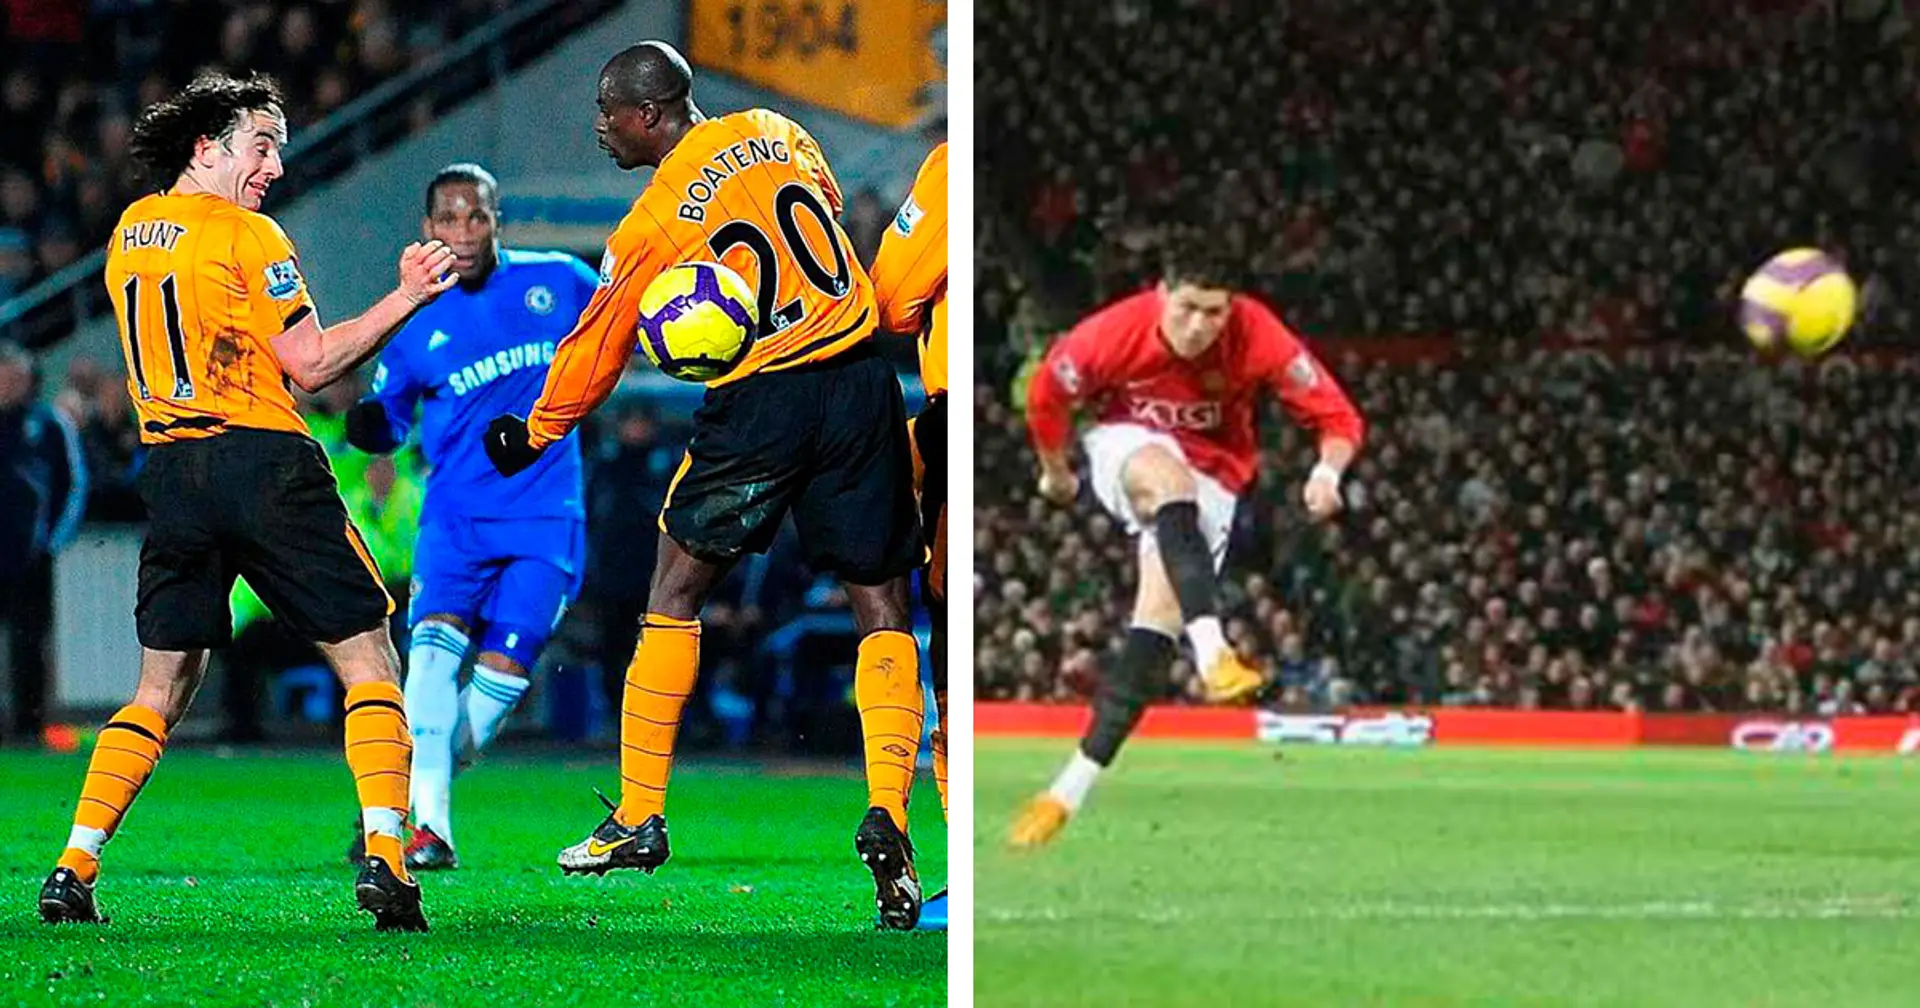 'When you hit the valve the ball comes down more': Cristiano's free-kick technique at United was so good Drogba copied it